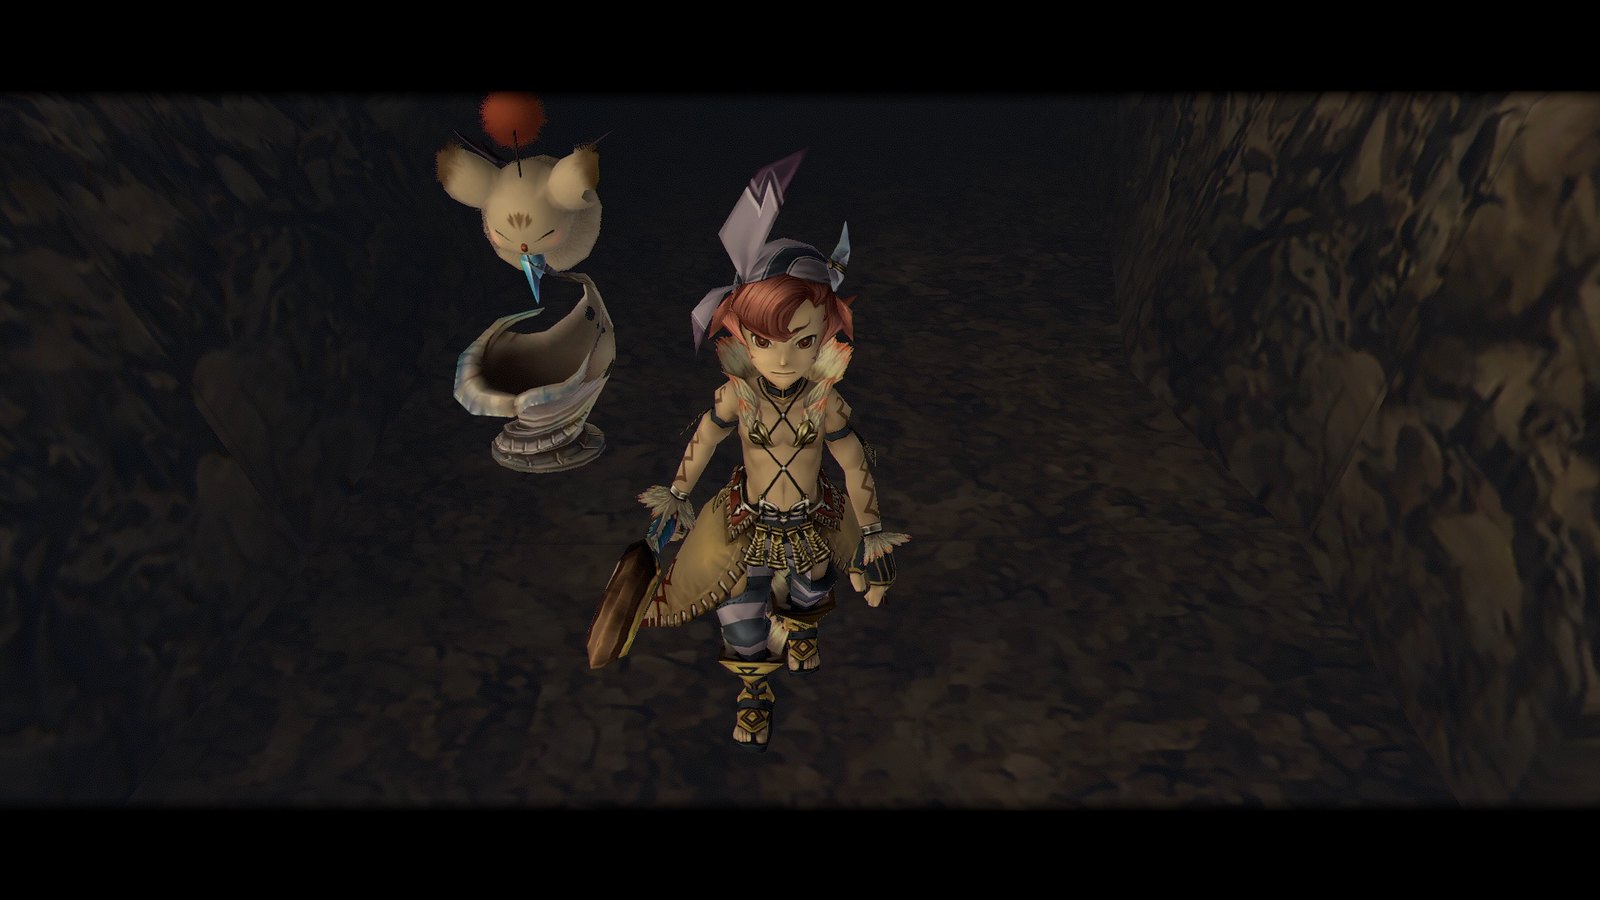 Final Fantasy Crystal Chronicles Remastered Edition Hits PS4 August 27 With New Features